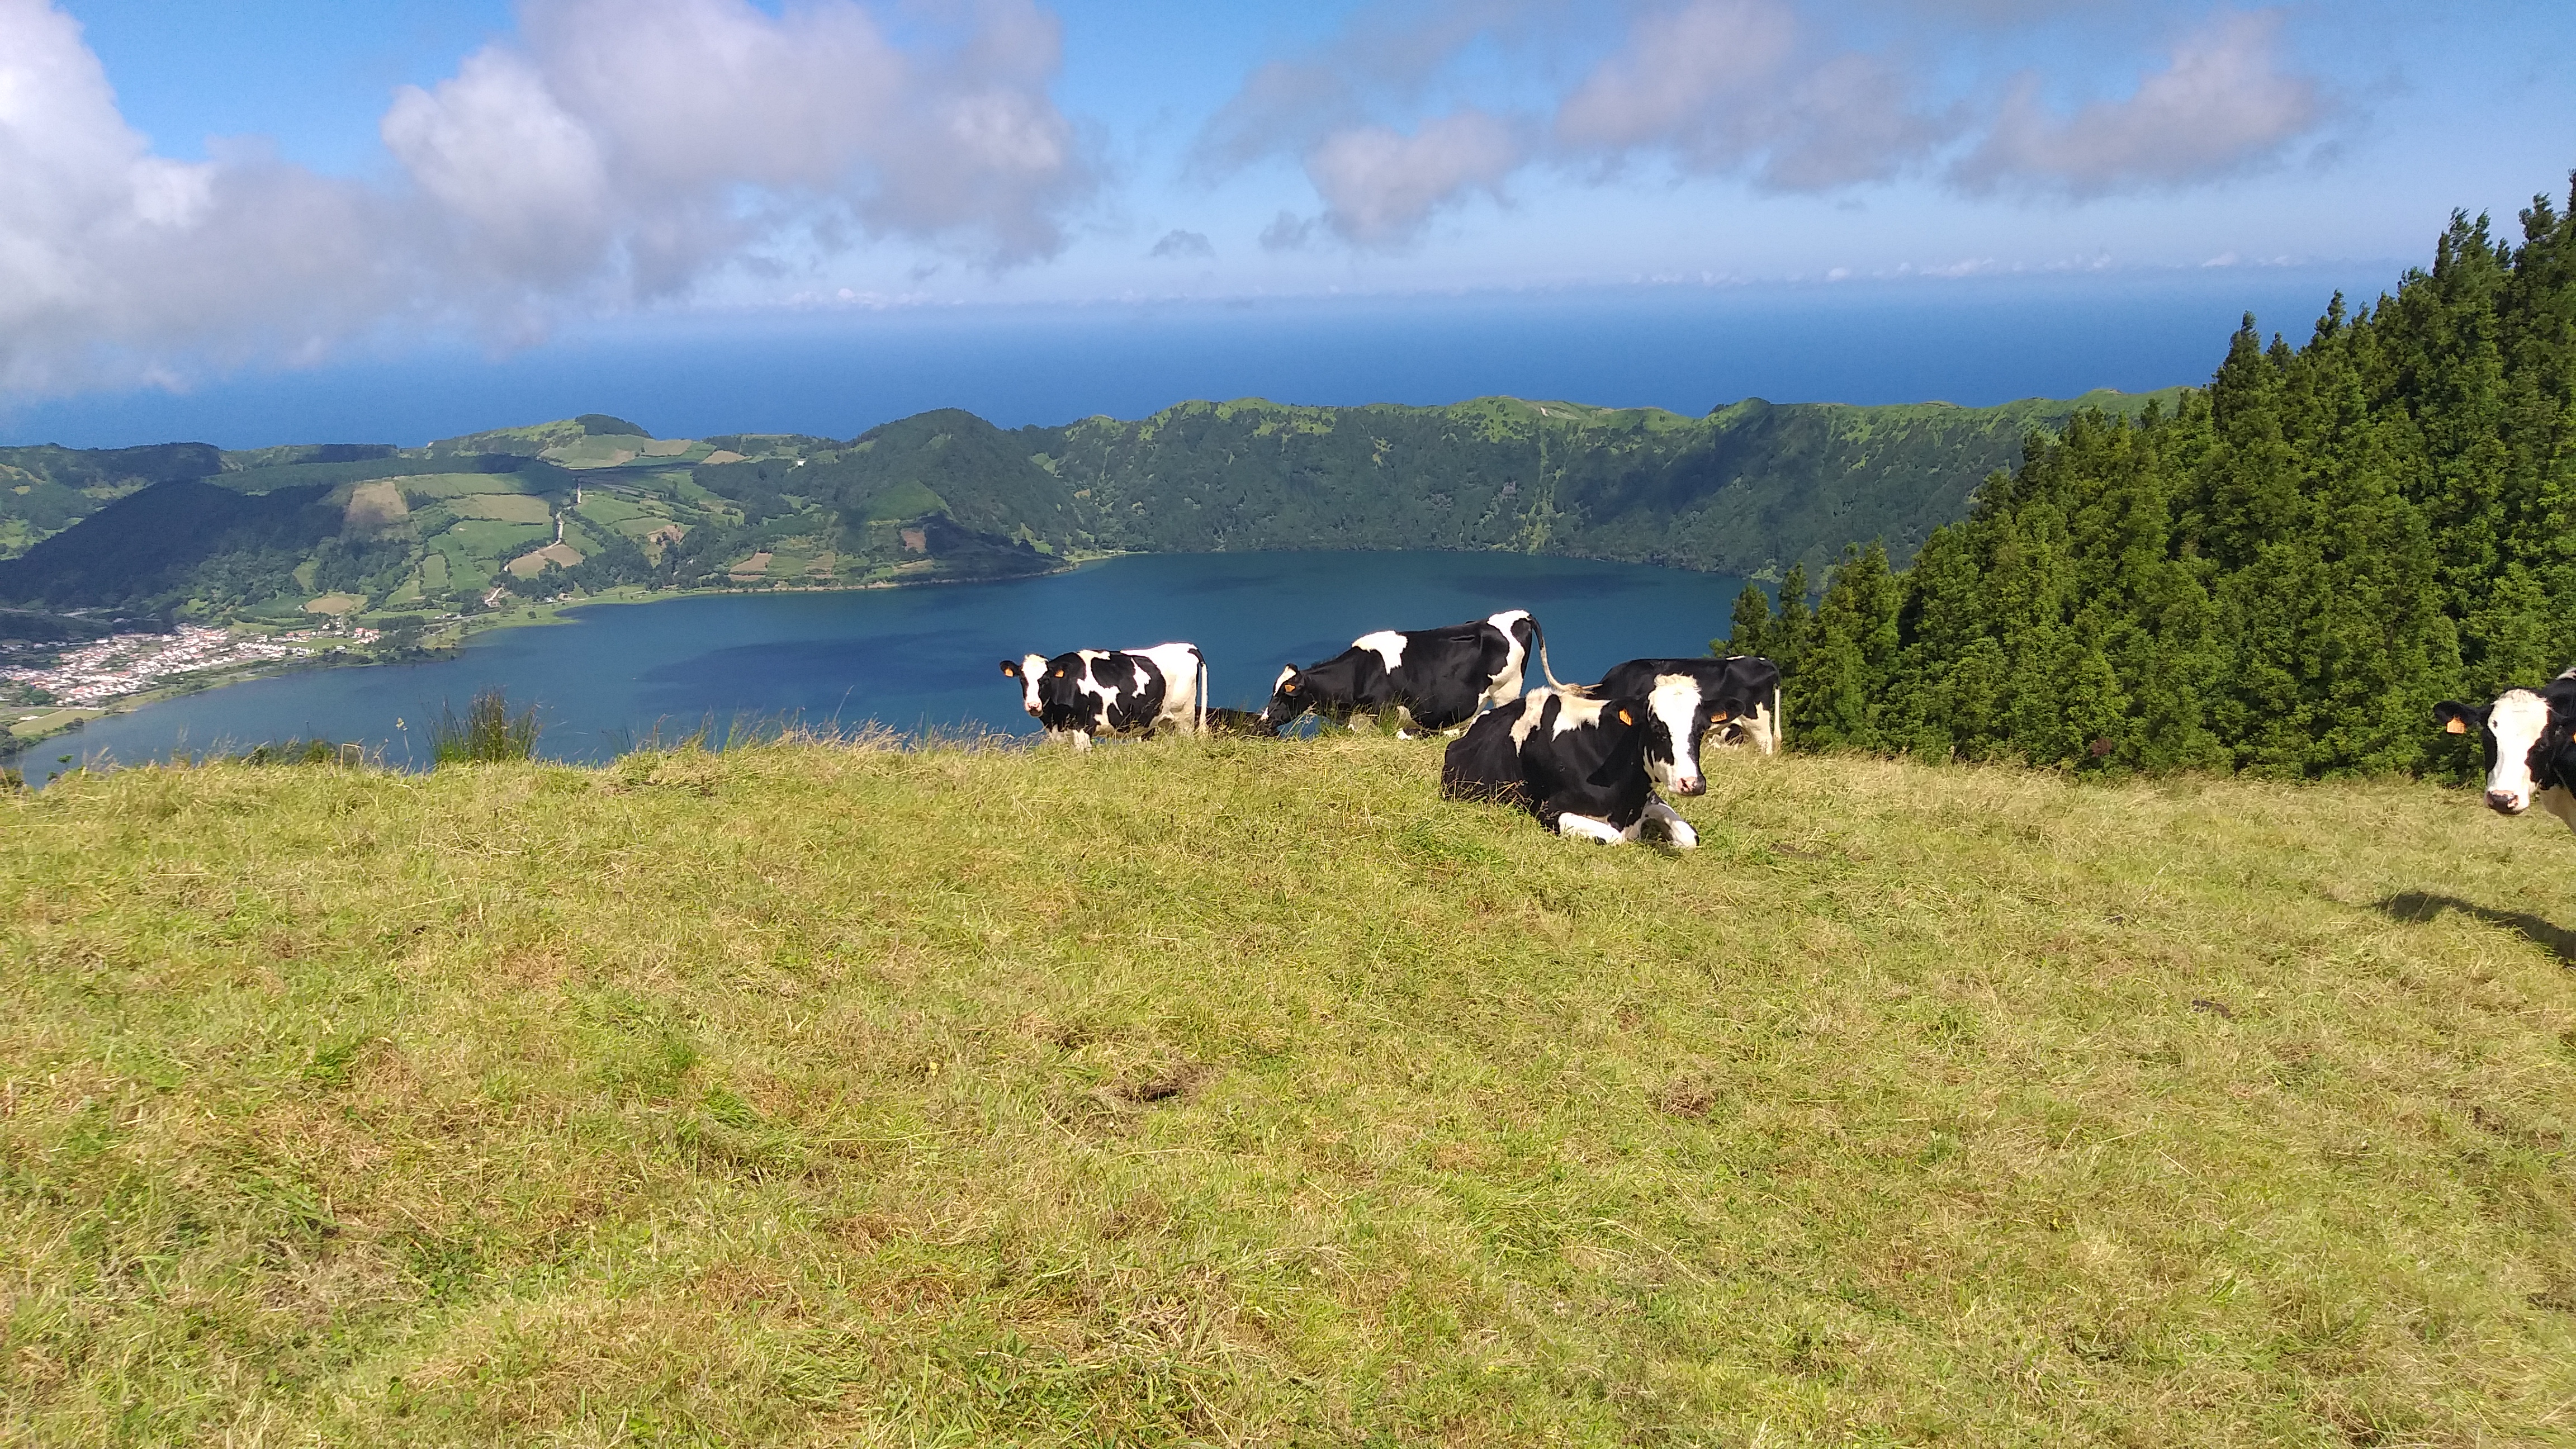 Scenery seen on the hiking trail of Sete Cidades